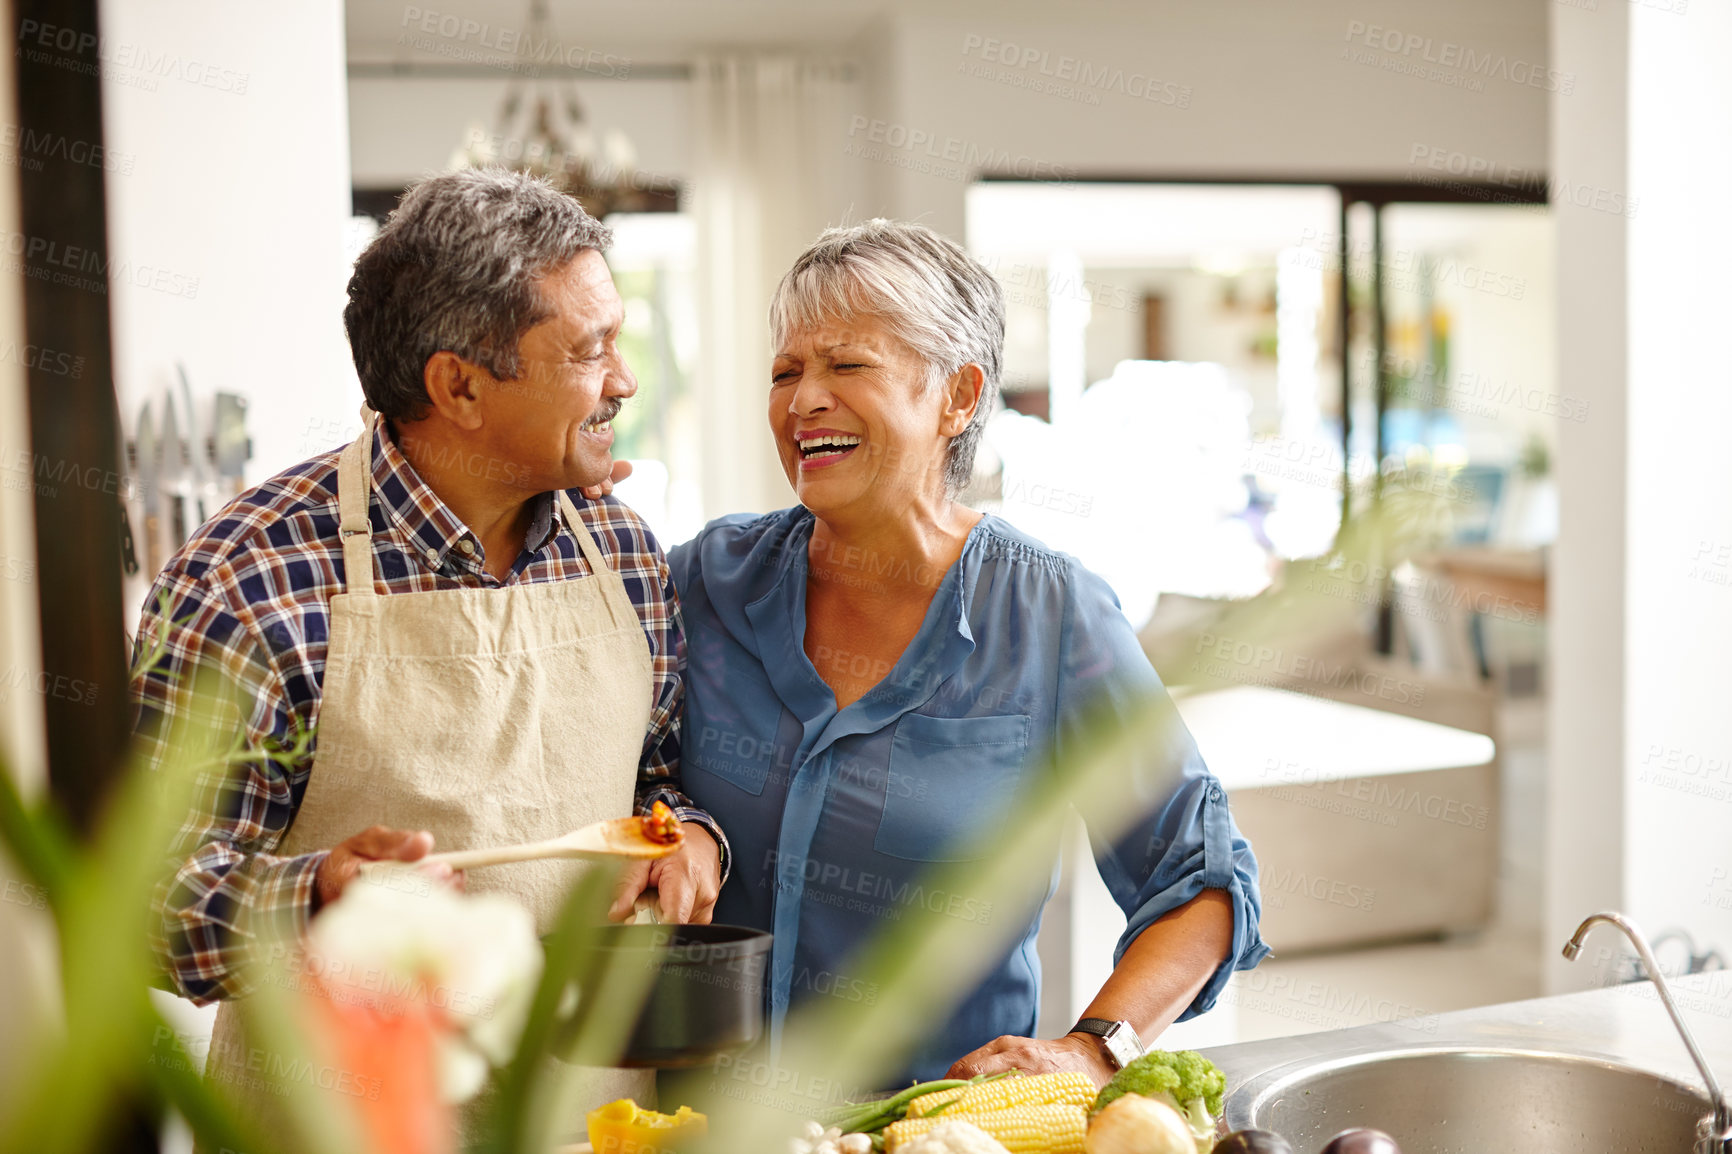 Buy stock photo Shot of a happy senior couple cooking a healthy meal together at home